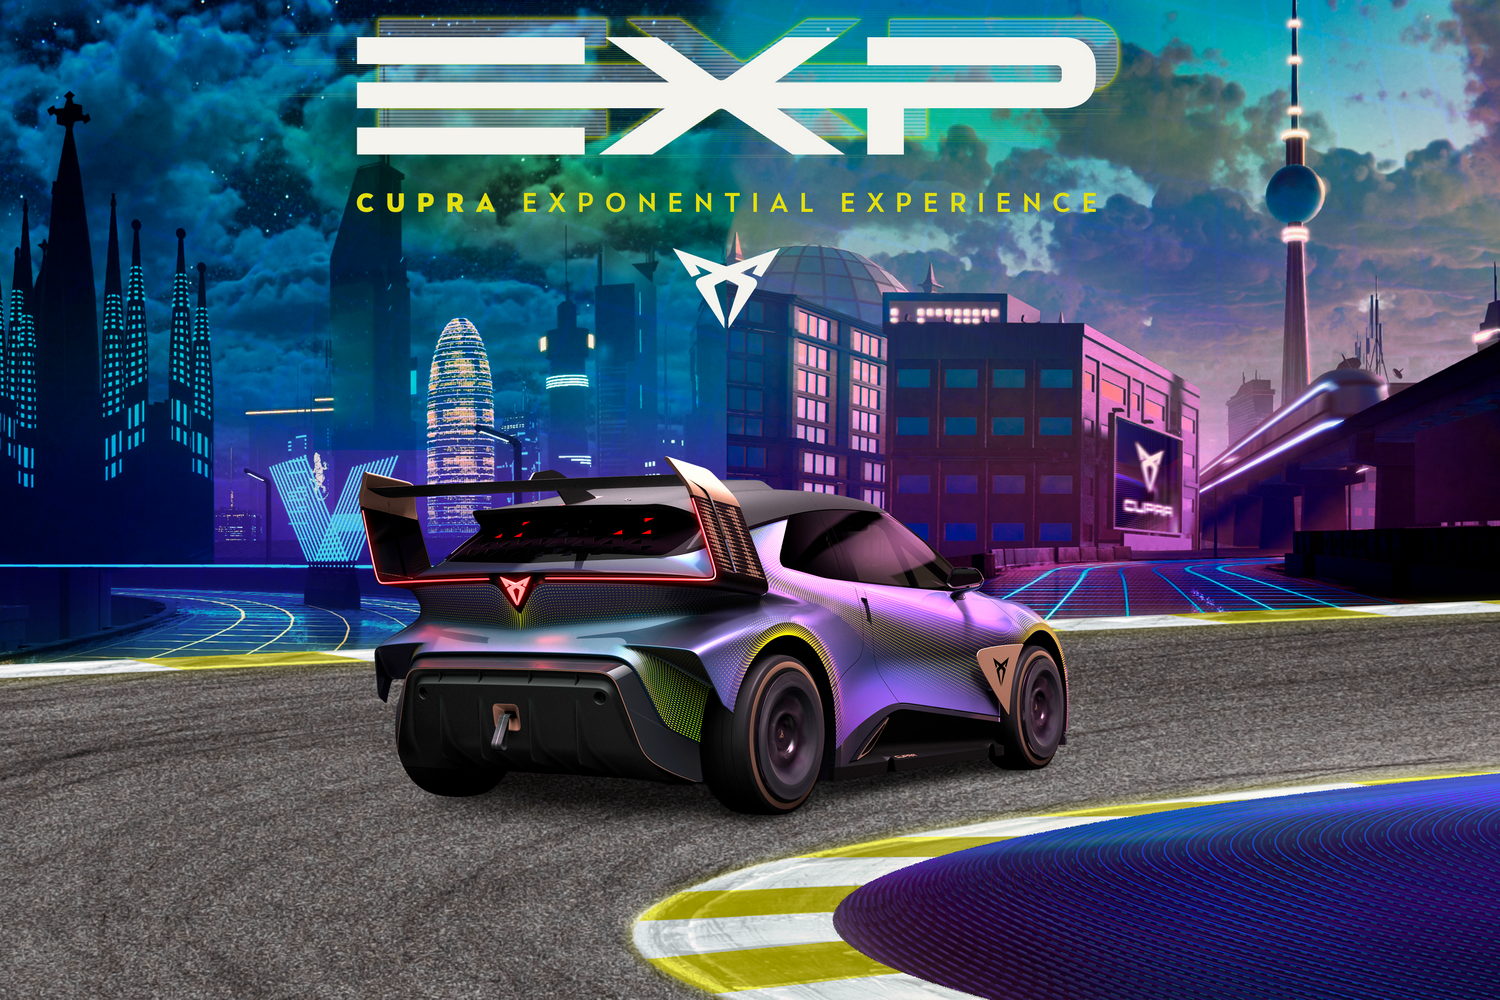 Cupra merges real life and video games